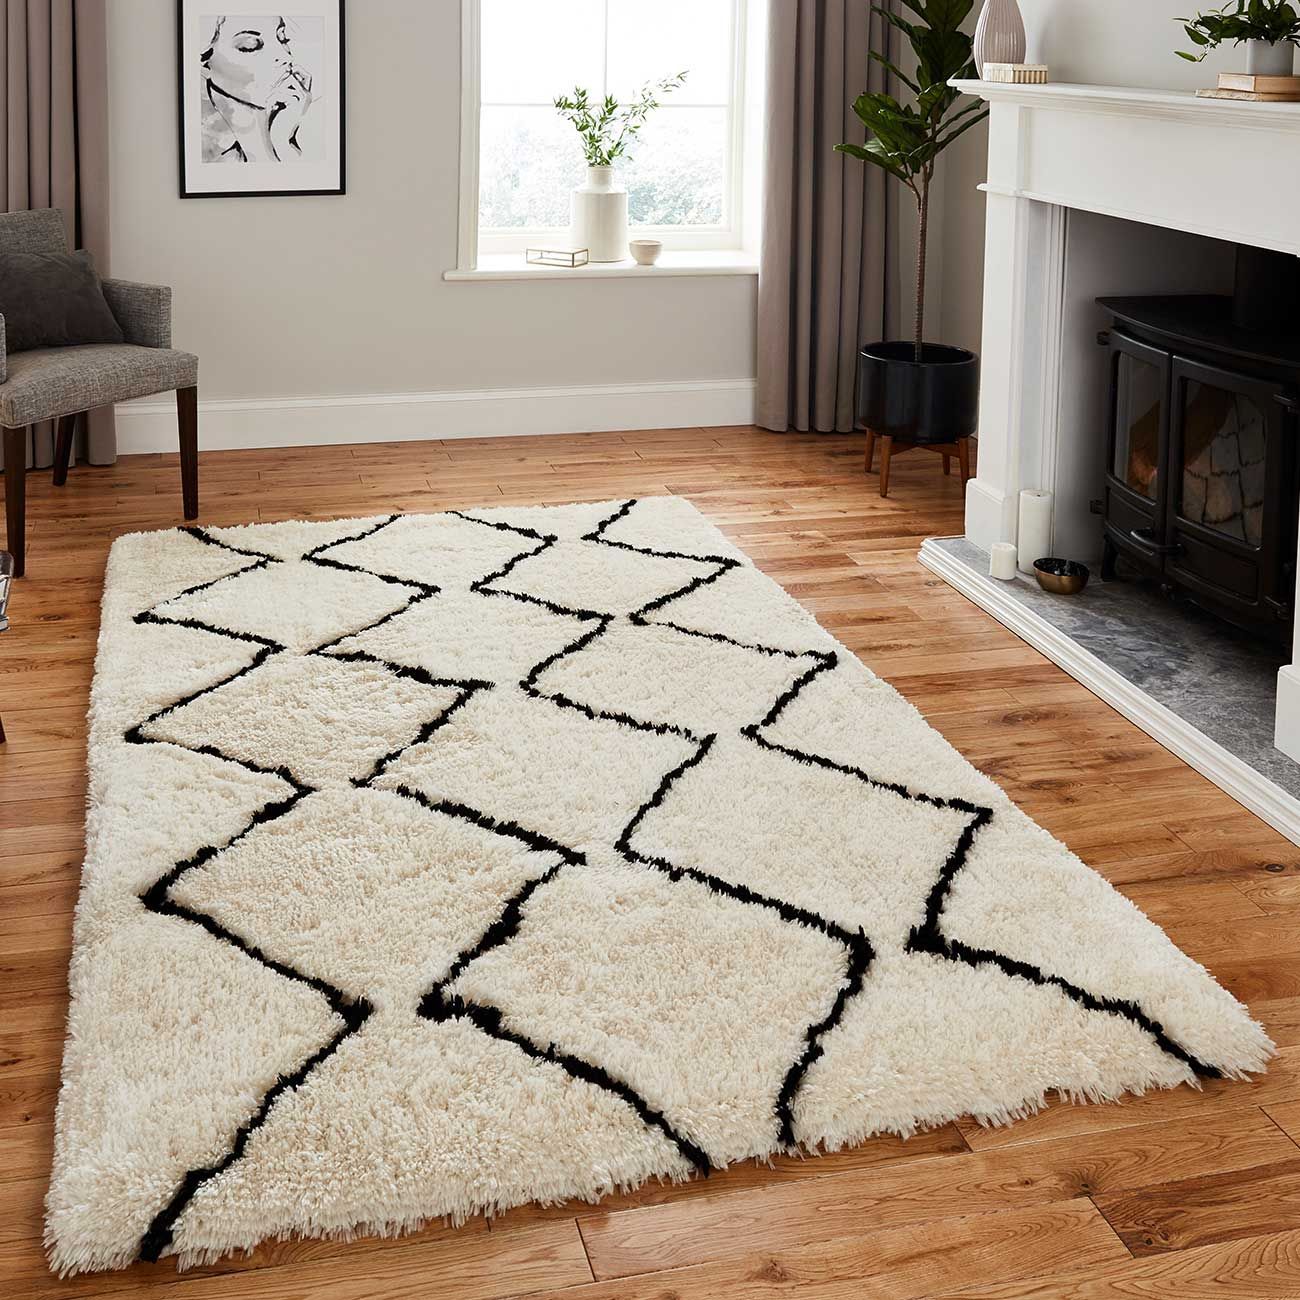 Buy Online Think Rugs Morocco 3742 Ivory/black Shaggy Rug – Therugshopuk Inside Ivory Black Rugs (View 6 of 15)